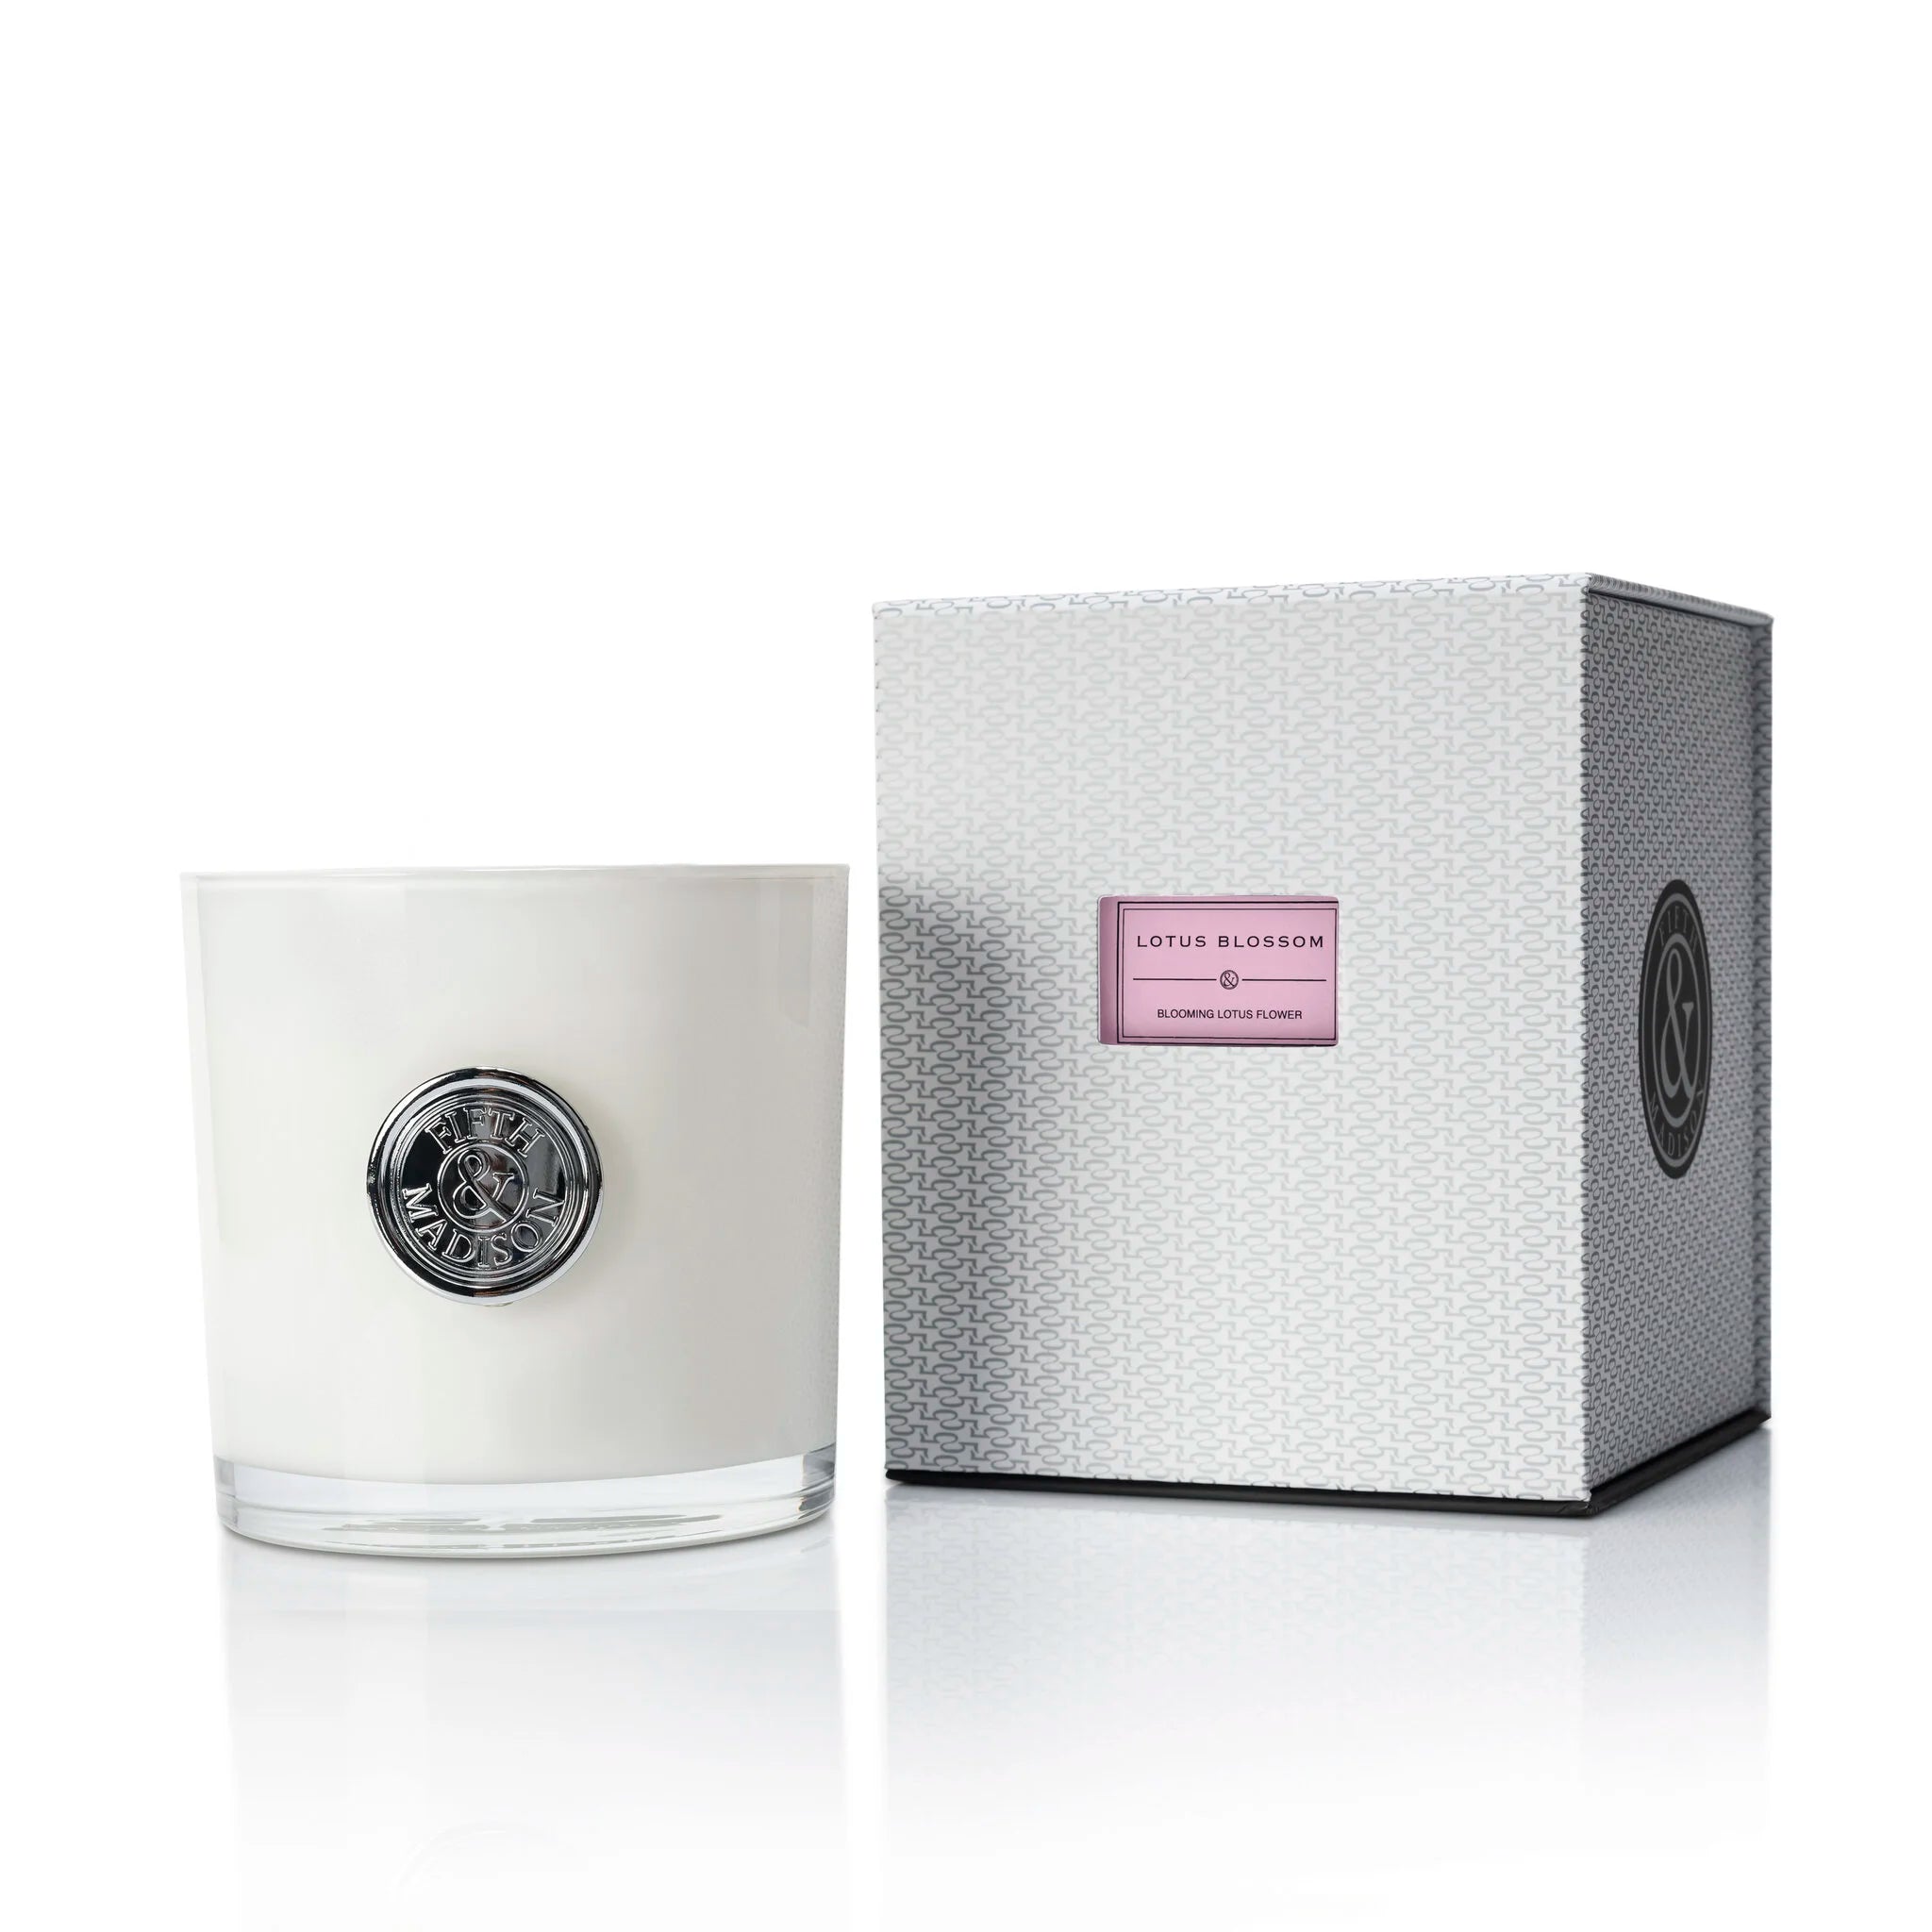 Lotus Blossom Gramercy Penthouse Triple Wick Candle